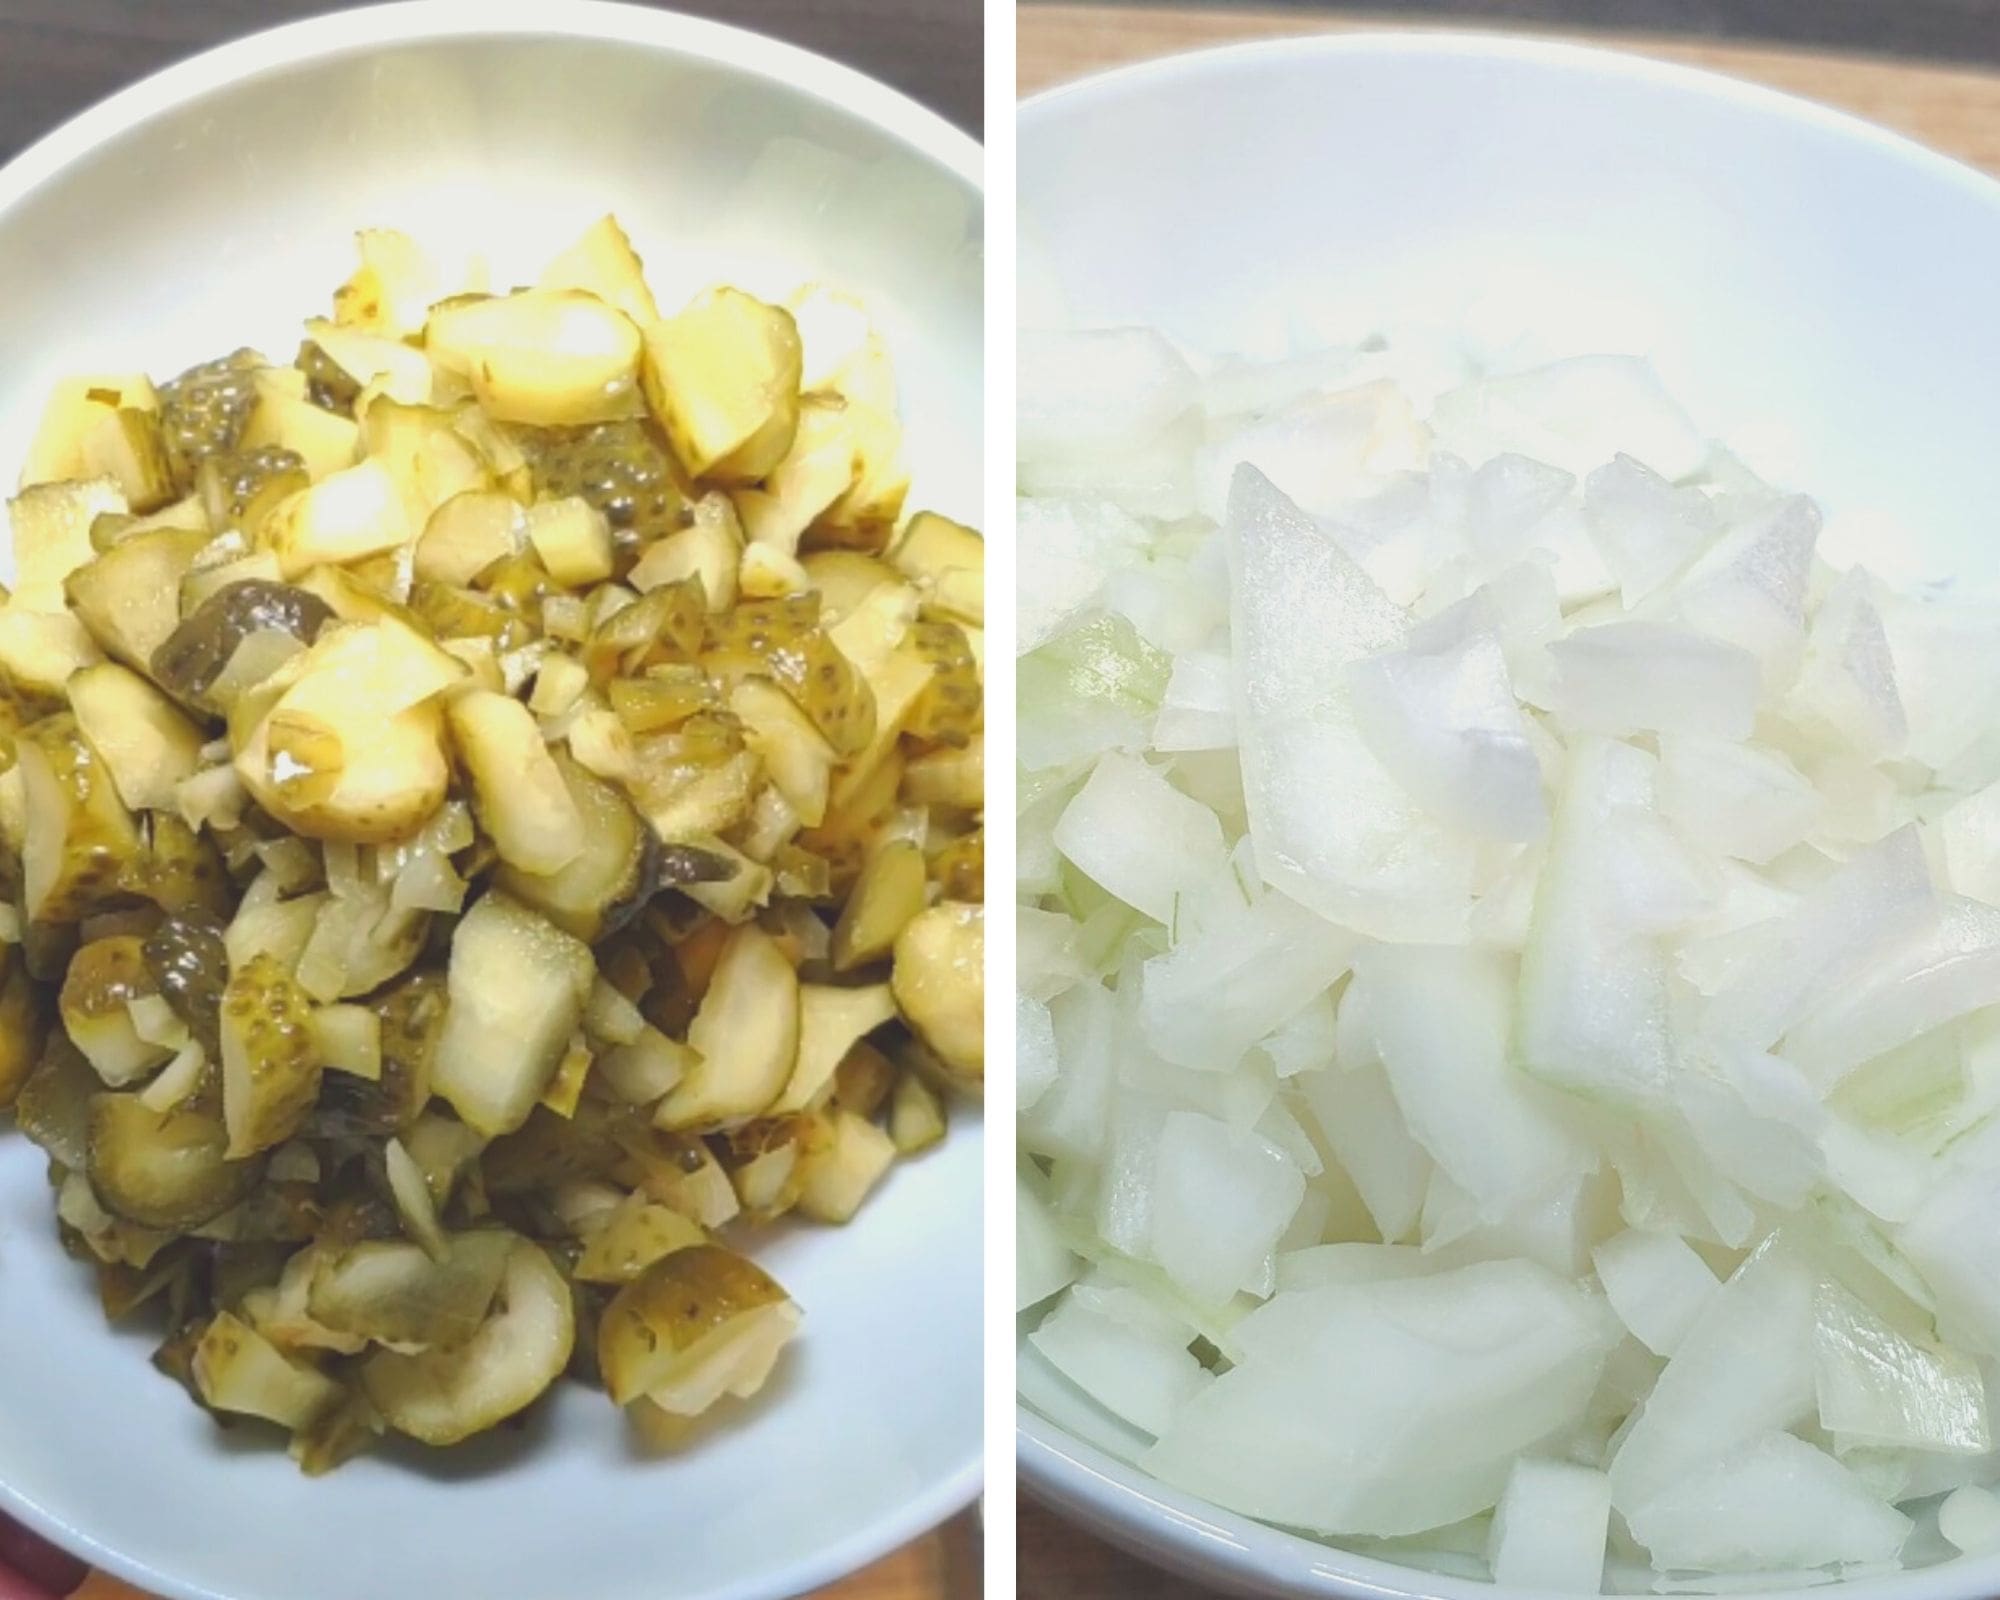 Cut the onion and pickles_German potato salad_simple grandma recipe_cold with mayo and pickles_my life in germany_hkwomanabroad-min